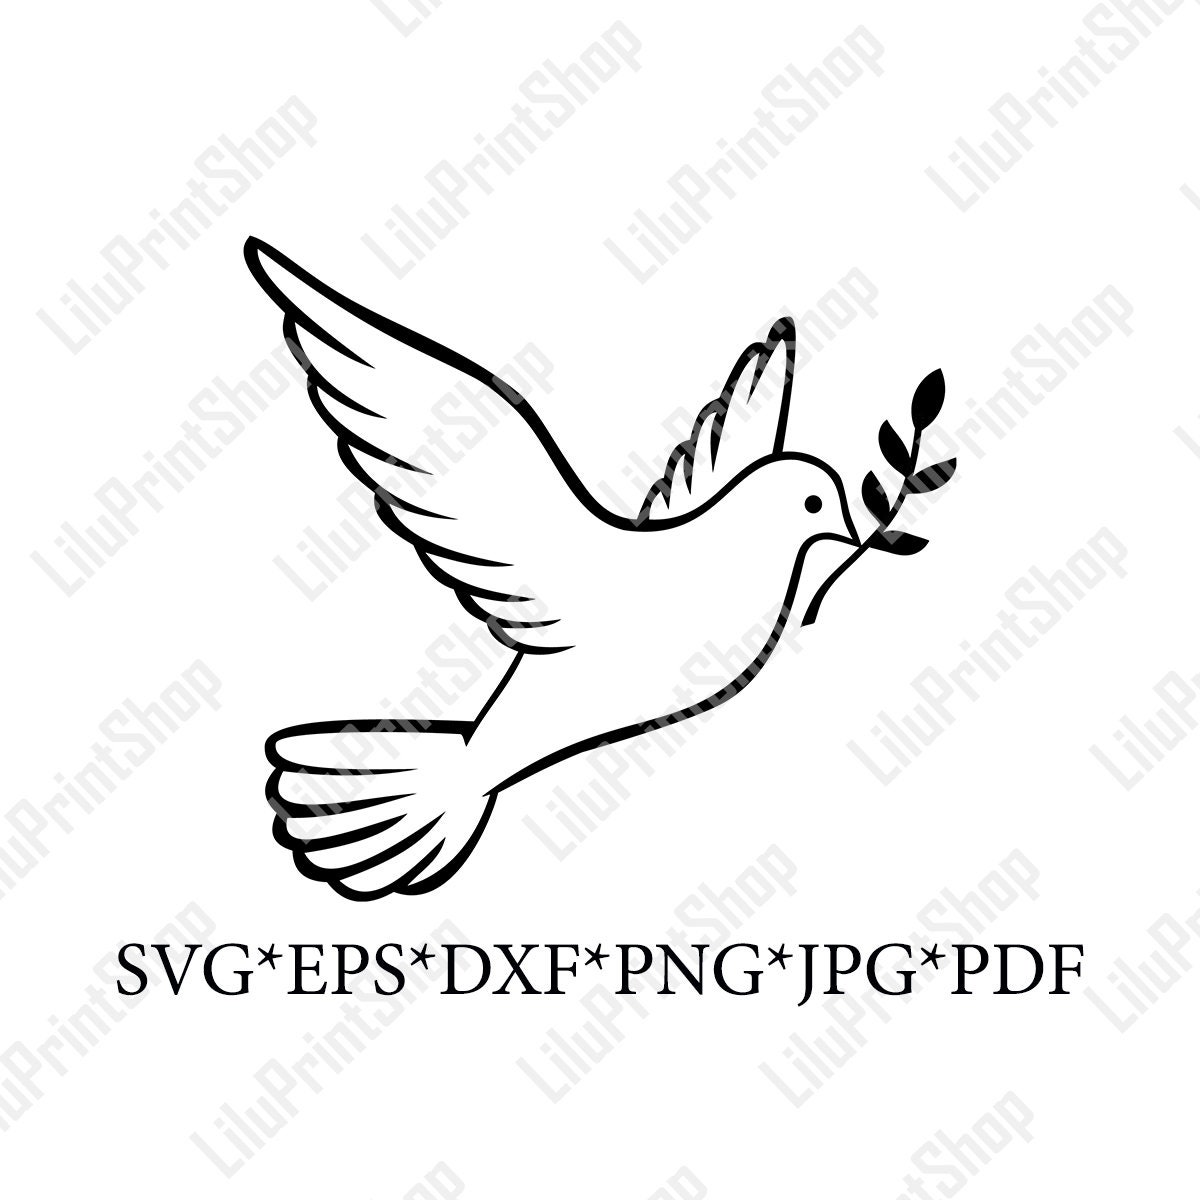 Rest In Peace PNG Transparent Images Free Download, Vector Files